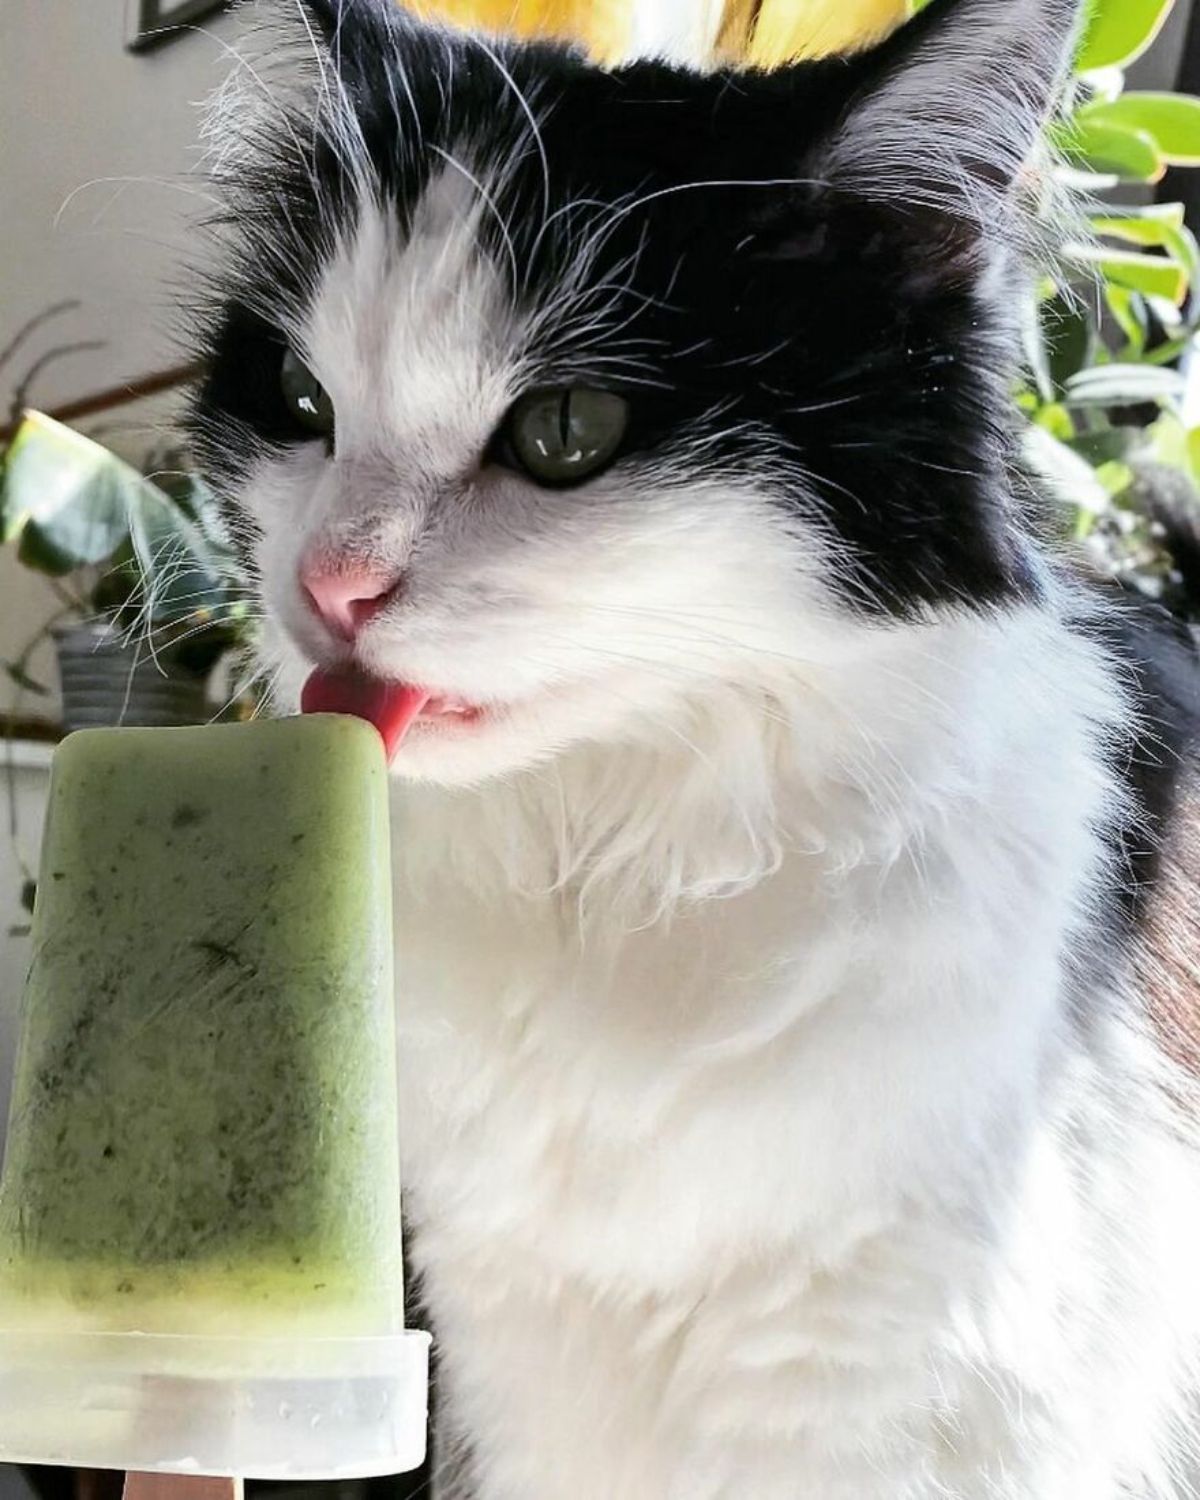 black and white fluffy cat licking a green popsicle